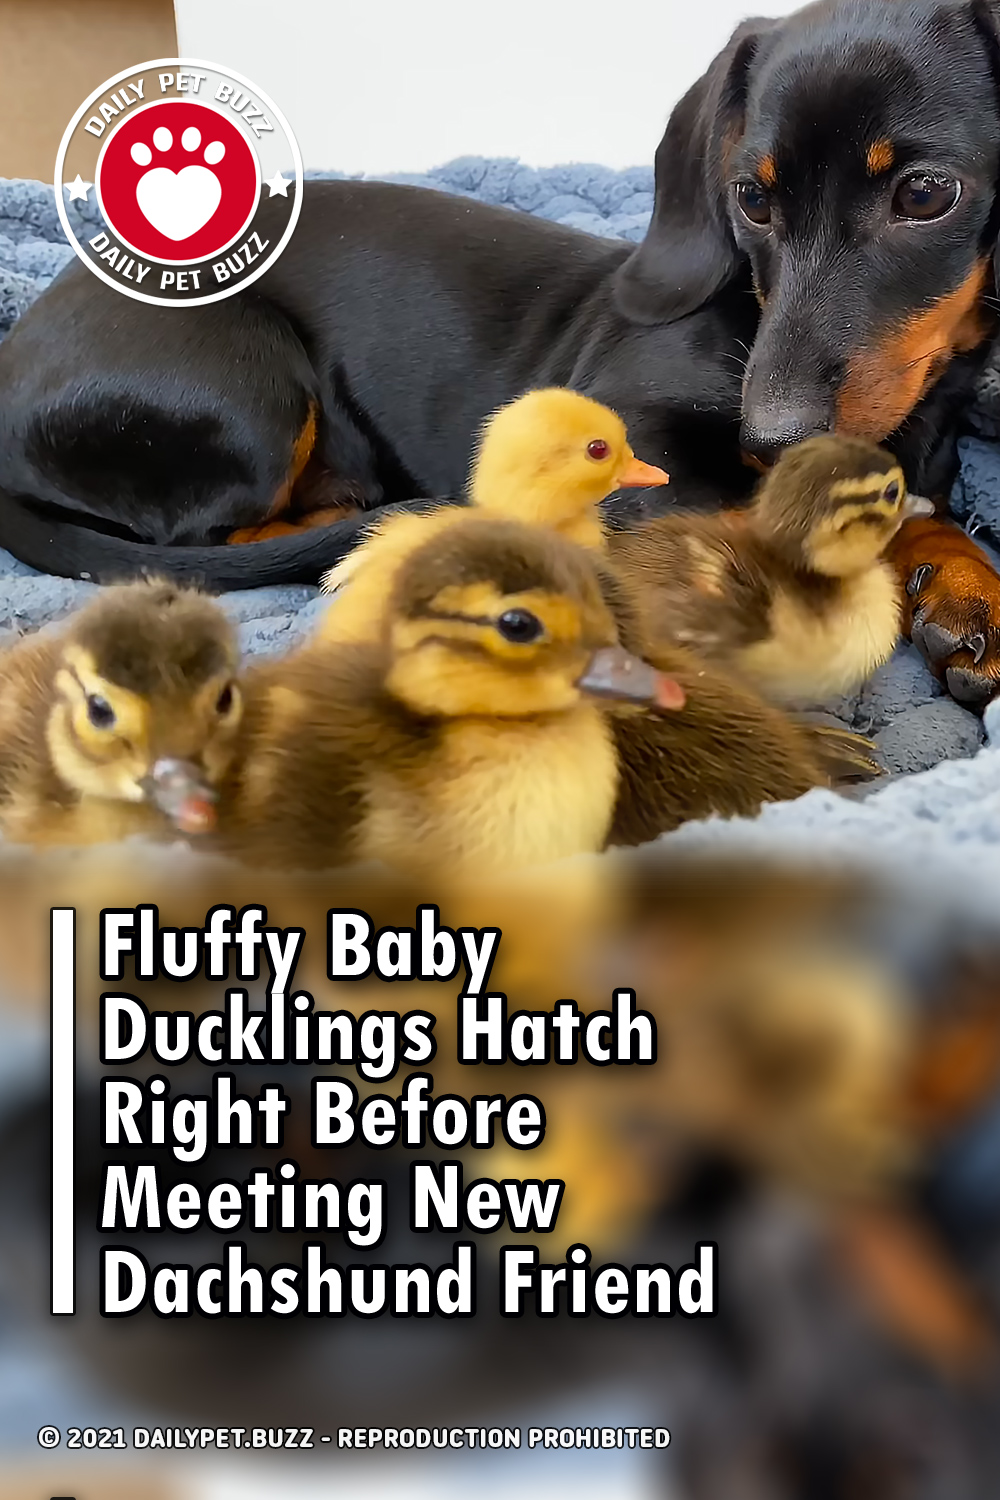 Fluffy Baby Ducklings Hatch Right Before Meeting New Dachshund Friend